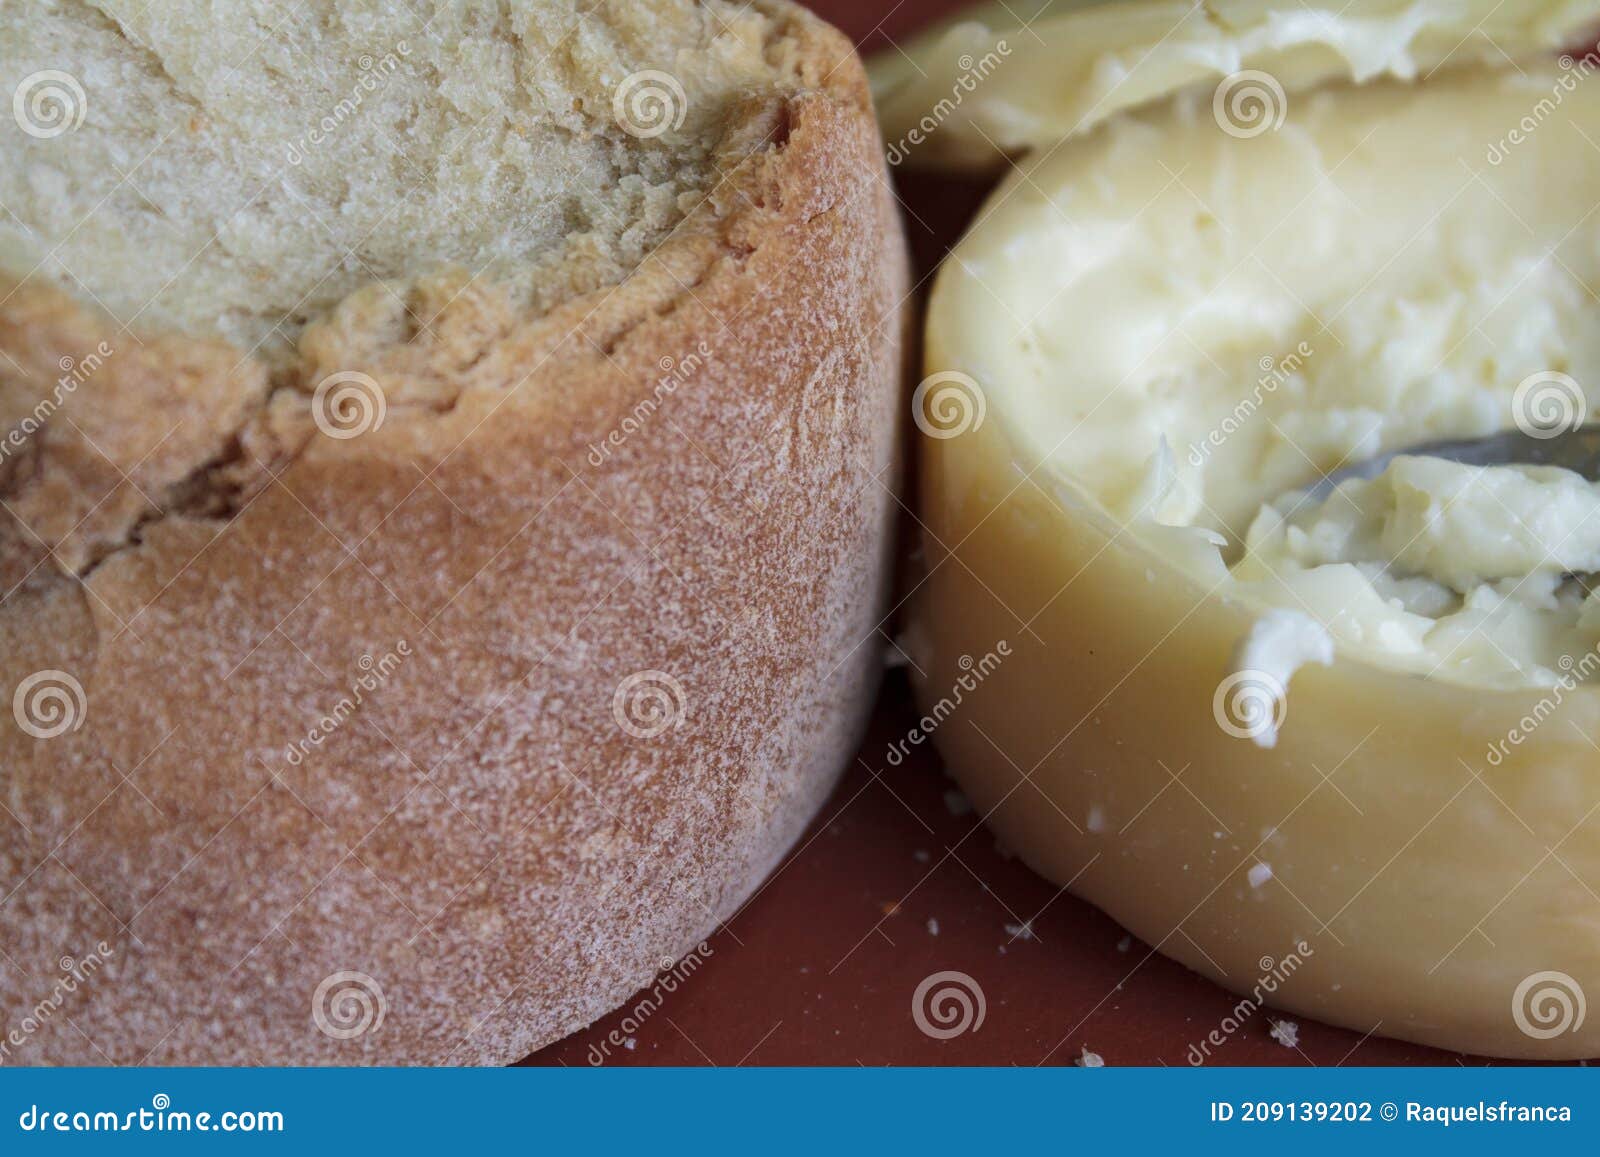 close-up of creamy and soft cheese and bread